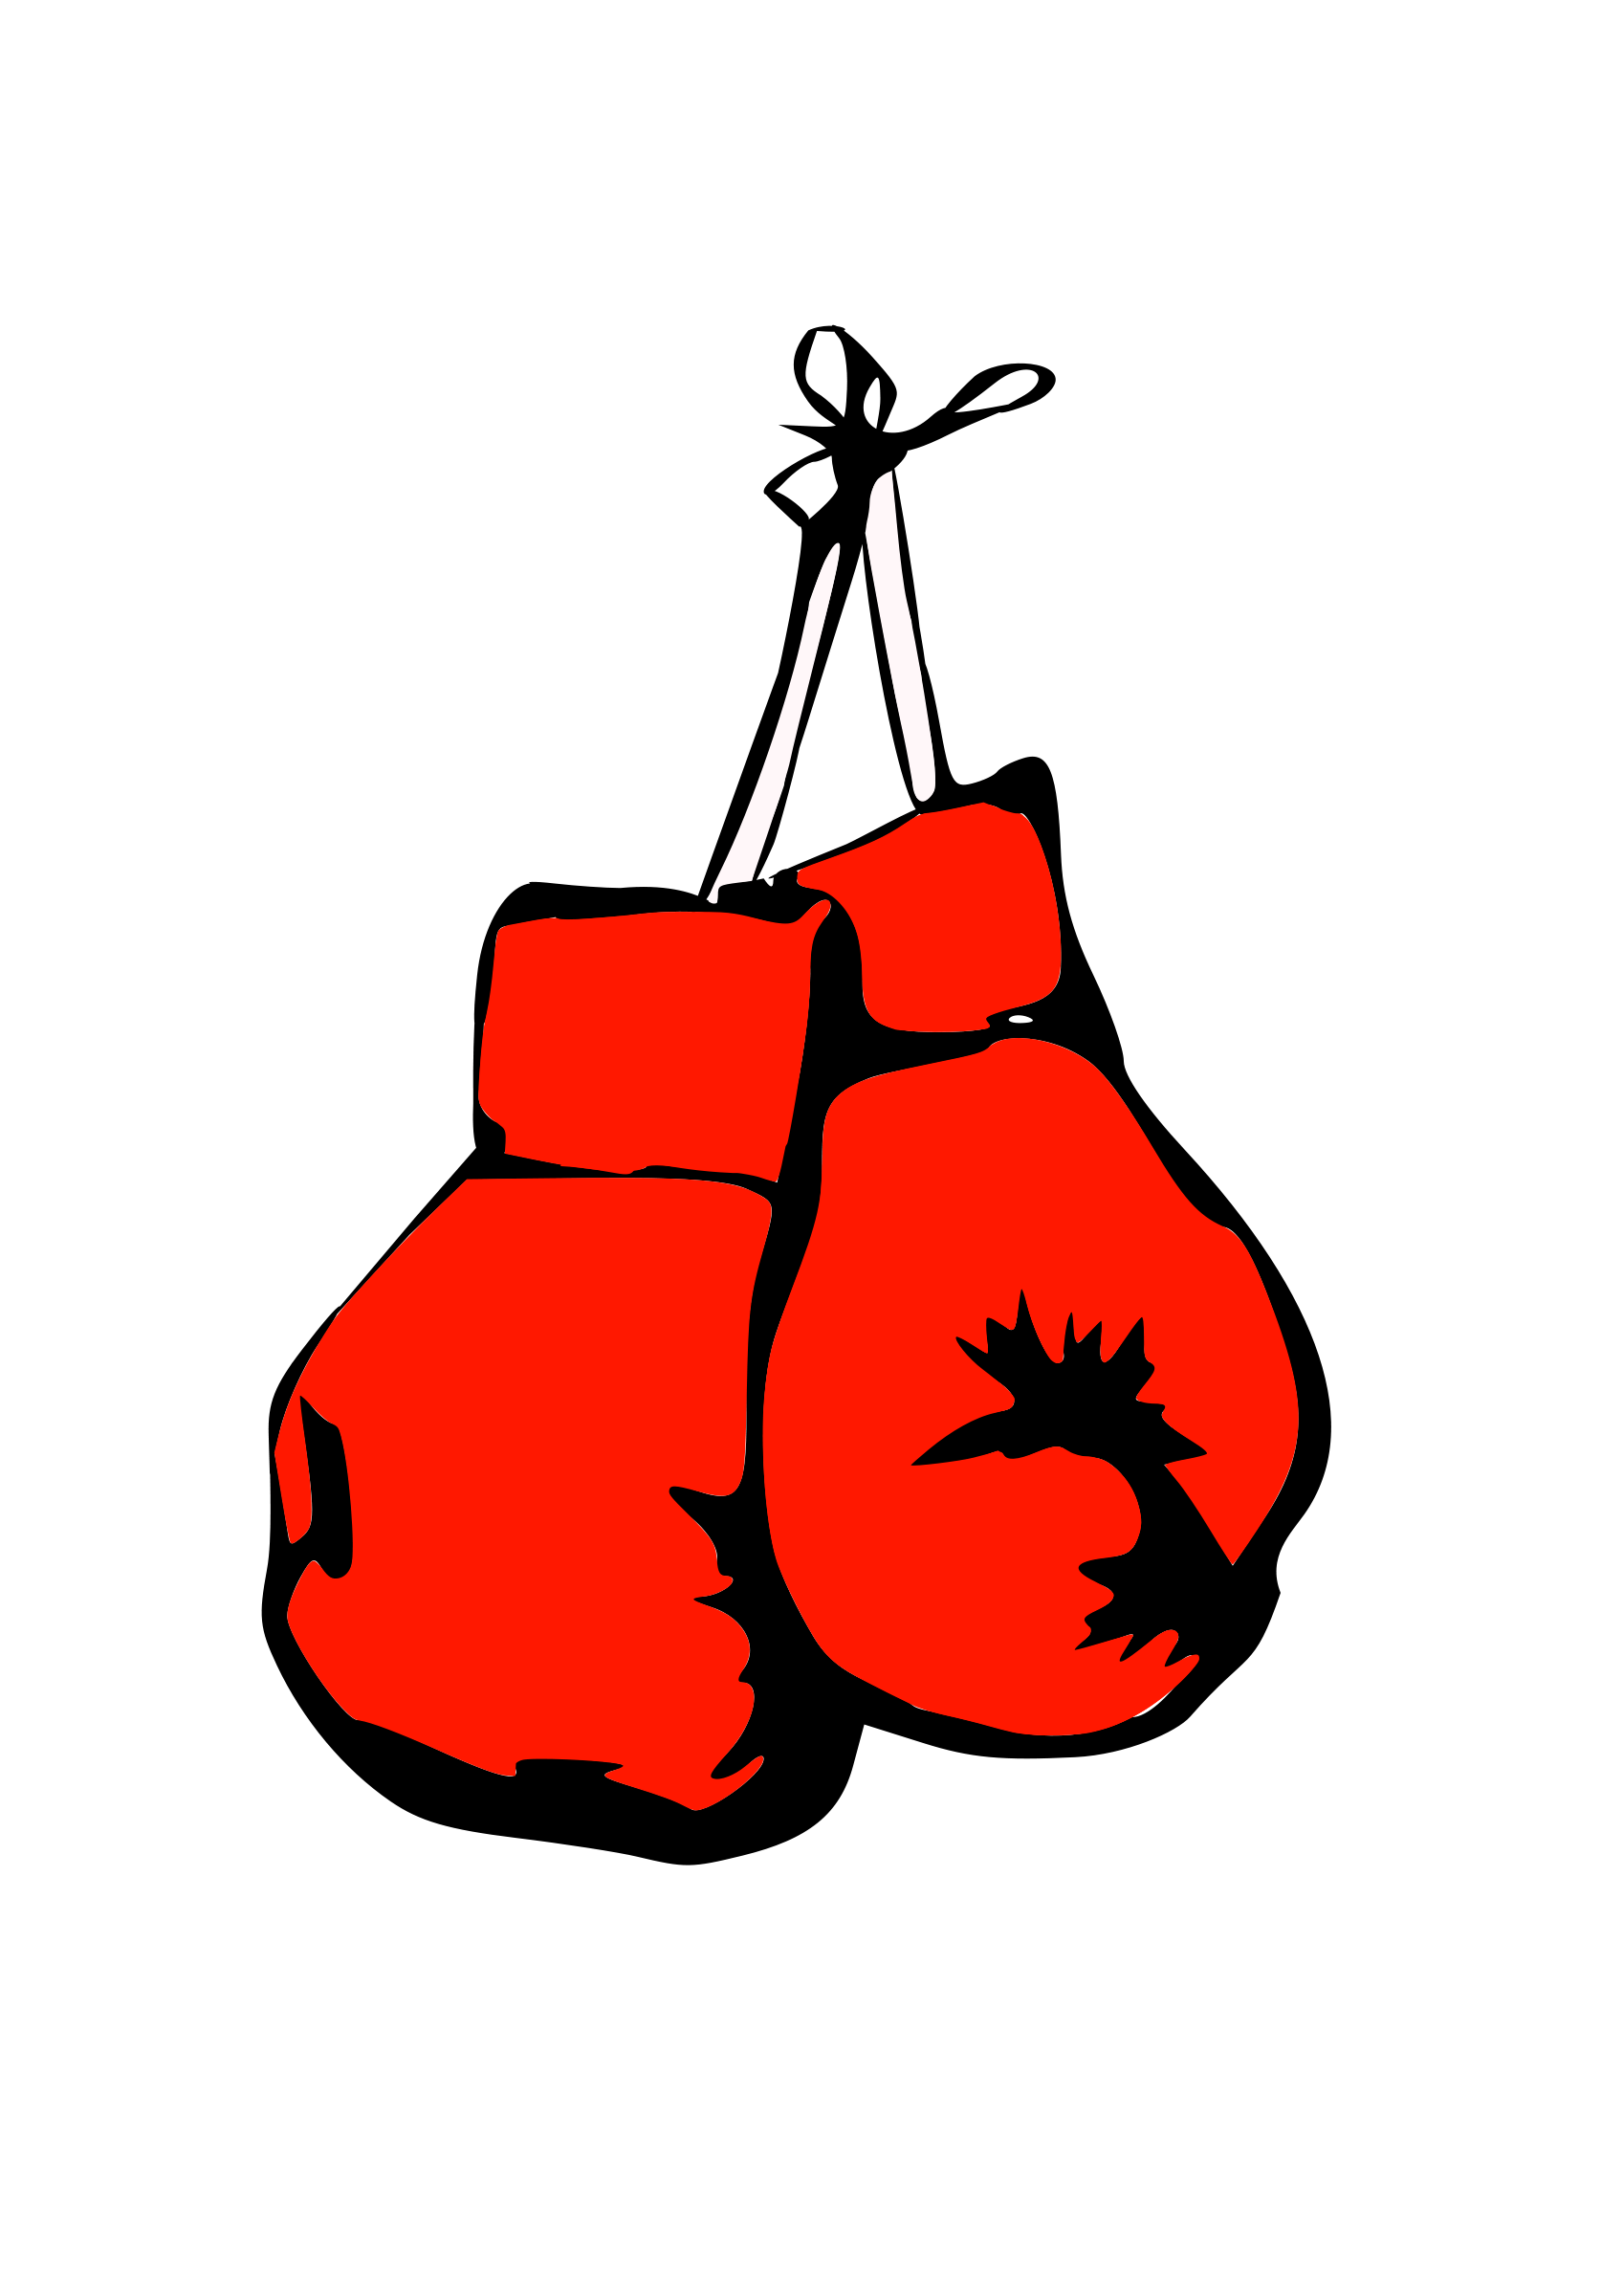 Boxing Glove Clip Art - Clipart library